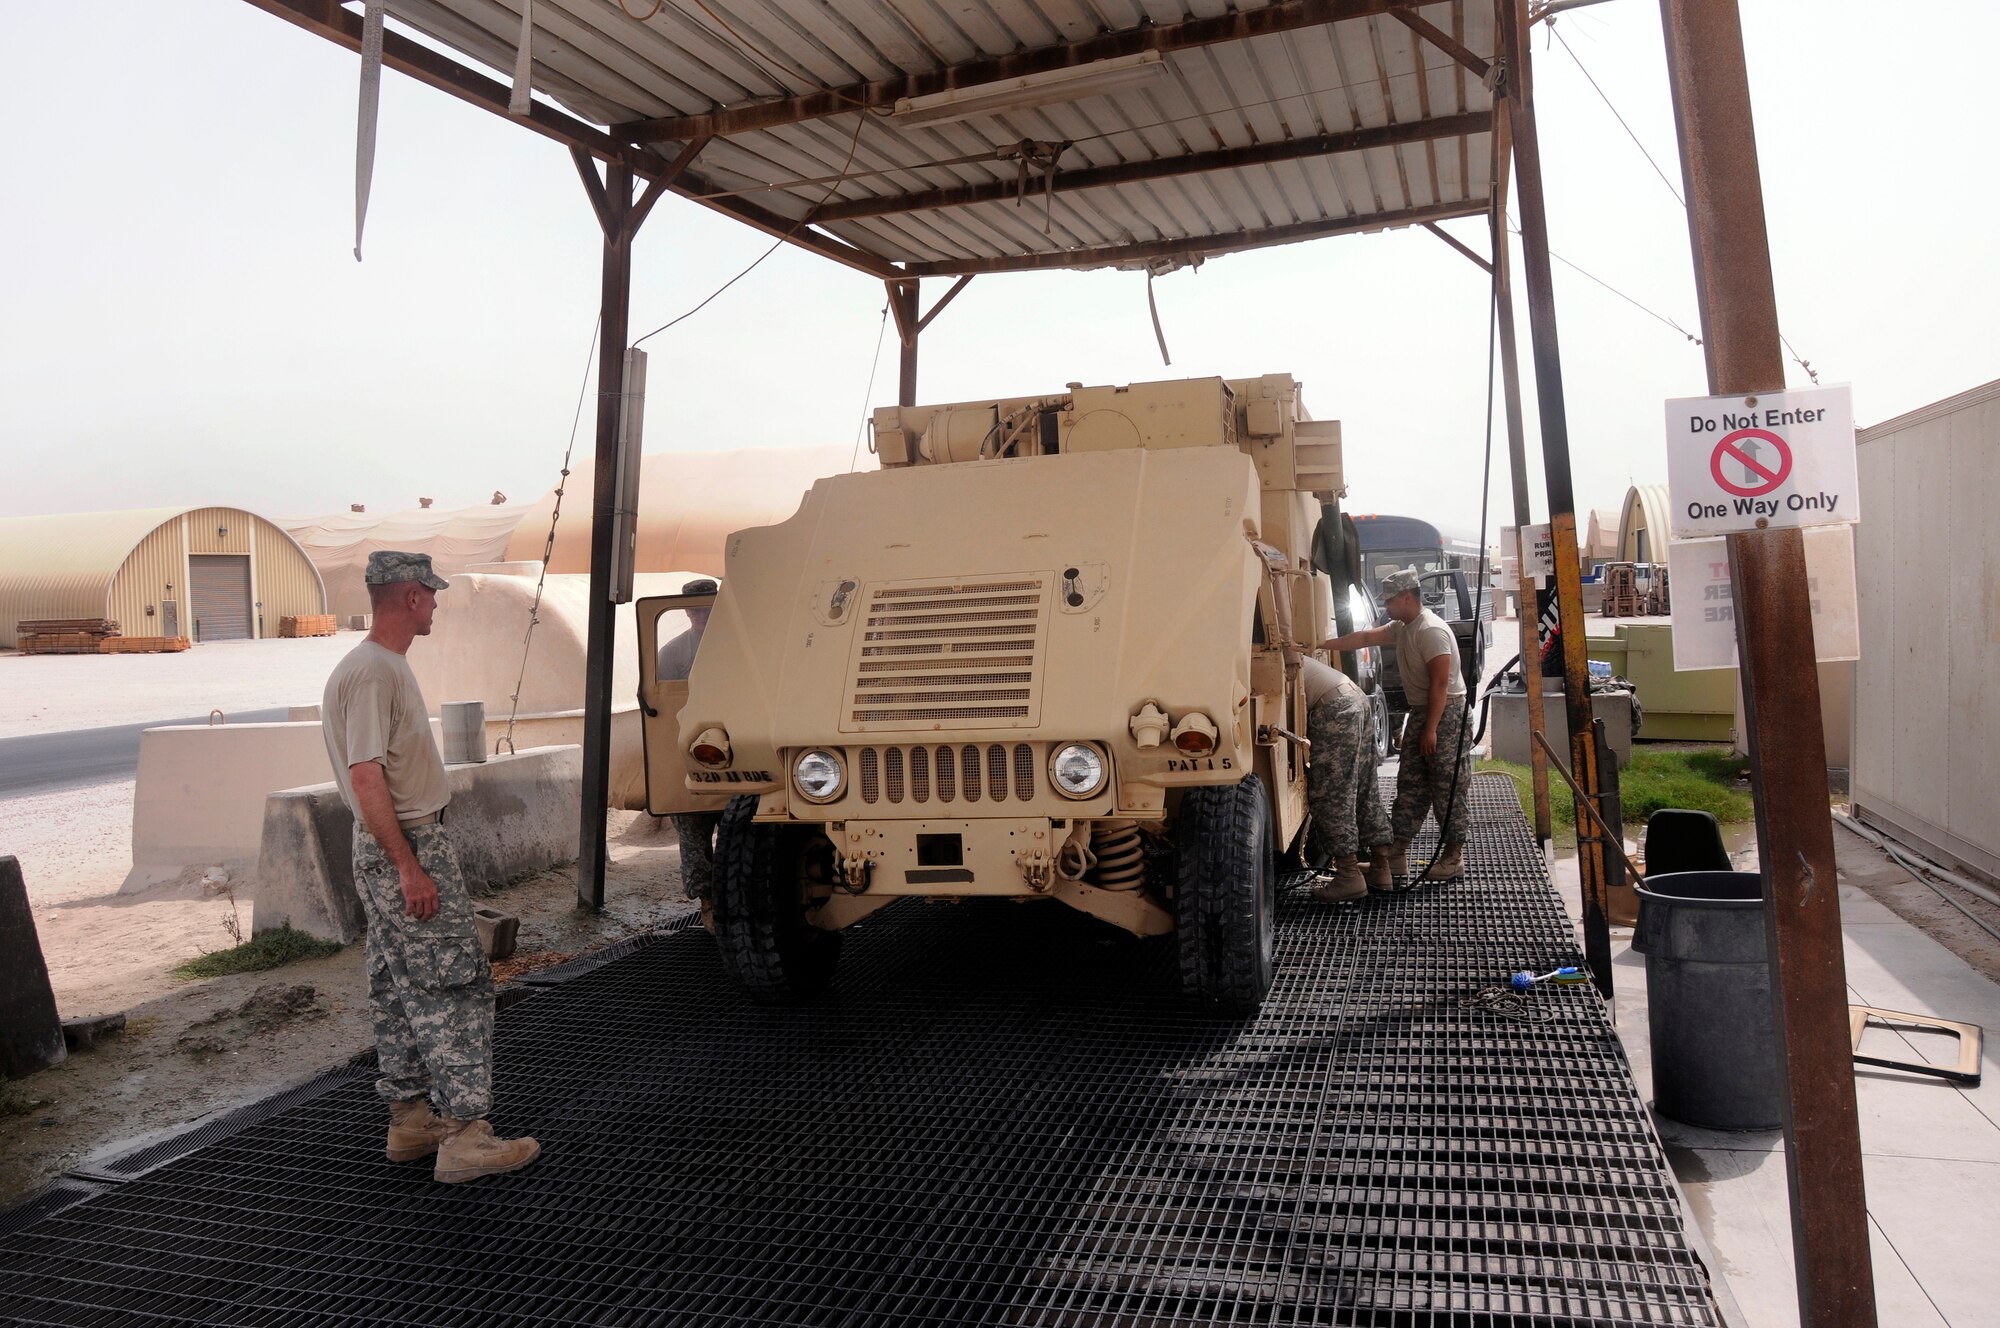 Soldiers deployed from the A 2-43, Air Defense Artillery at Fort Bliss, Texas, use a high pressure water hose to clean up a Battery Command Post (BCP) vehicle Aug. 7, 2008.  The soldiers are cleaning the BCP in preparation for shipping it back to Texas from an undisclosed airbase in Southwest Asia.  (U.S. Air Force photo by Tech. Sgt. Michael Boquette/RELEASED)